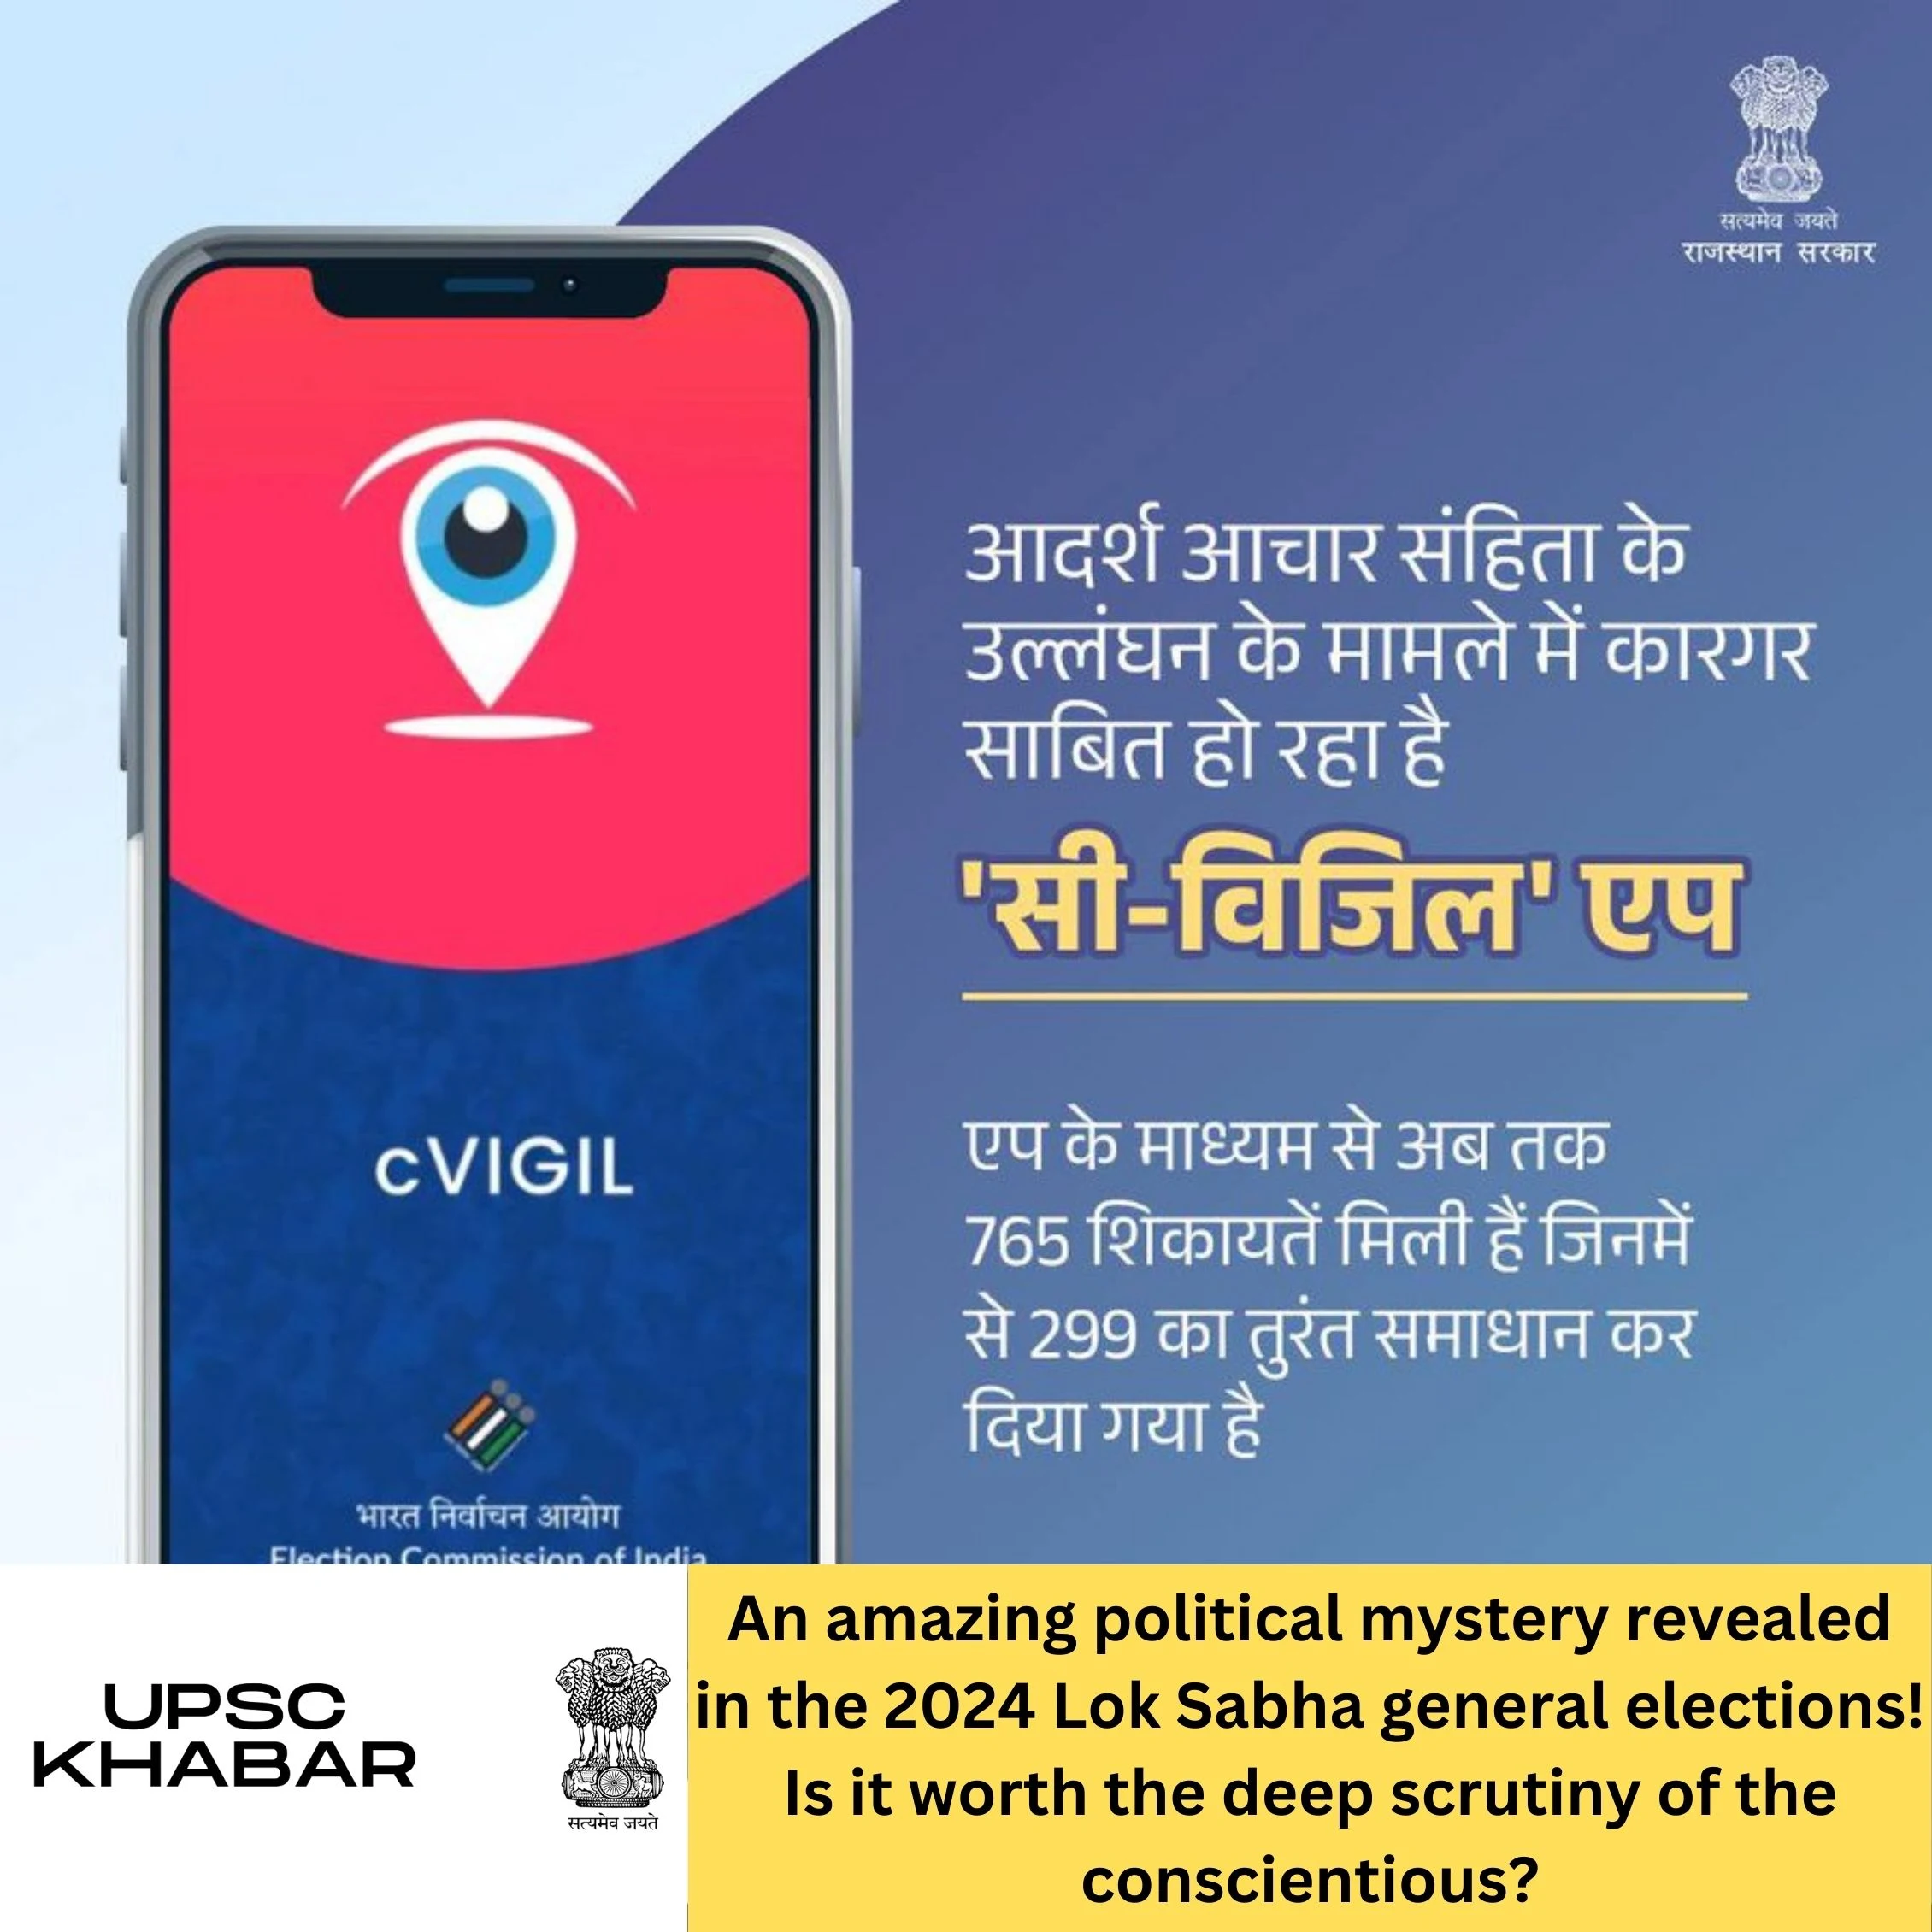 An amazing political mystery revealed in the 2024 Lok Sabha general elections! Is it worth the deep scrutiny of the conscientious?